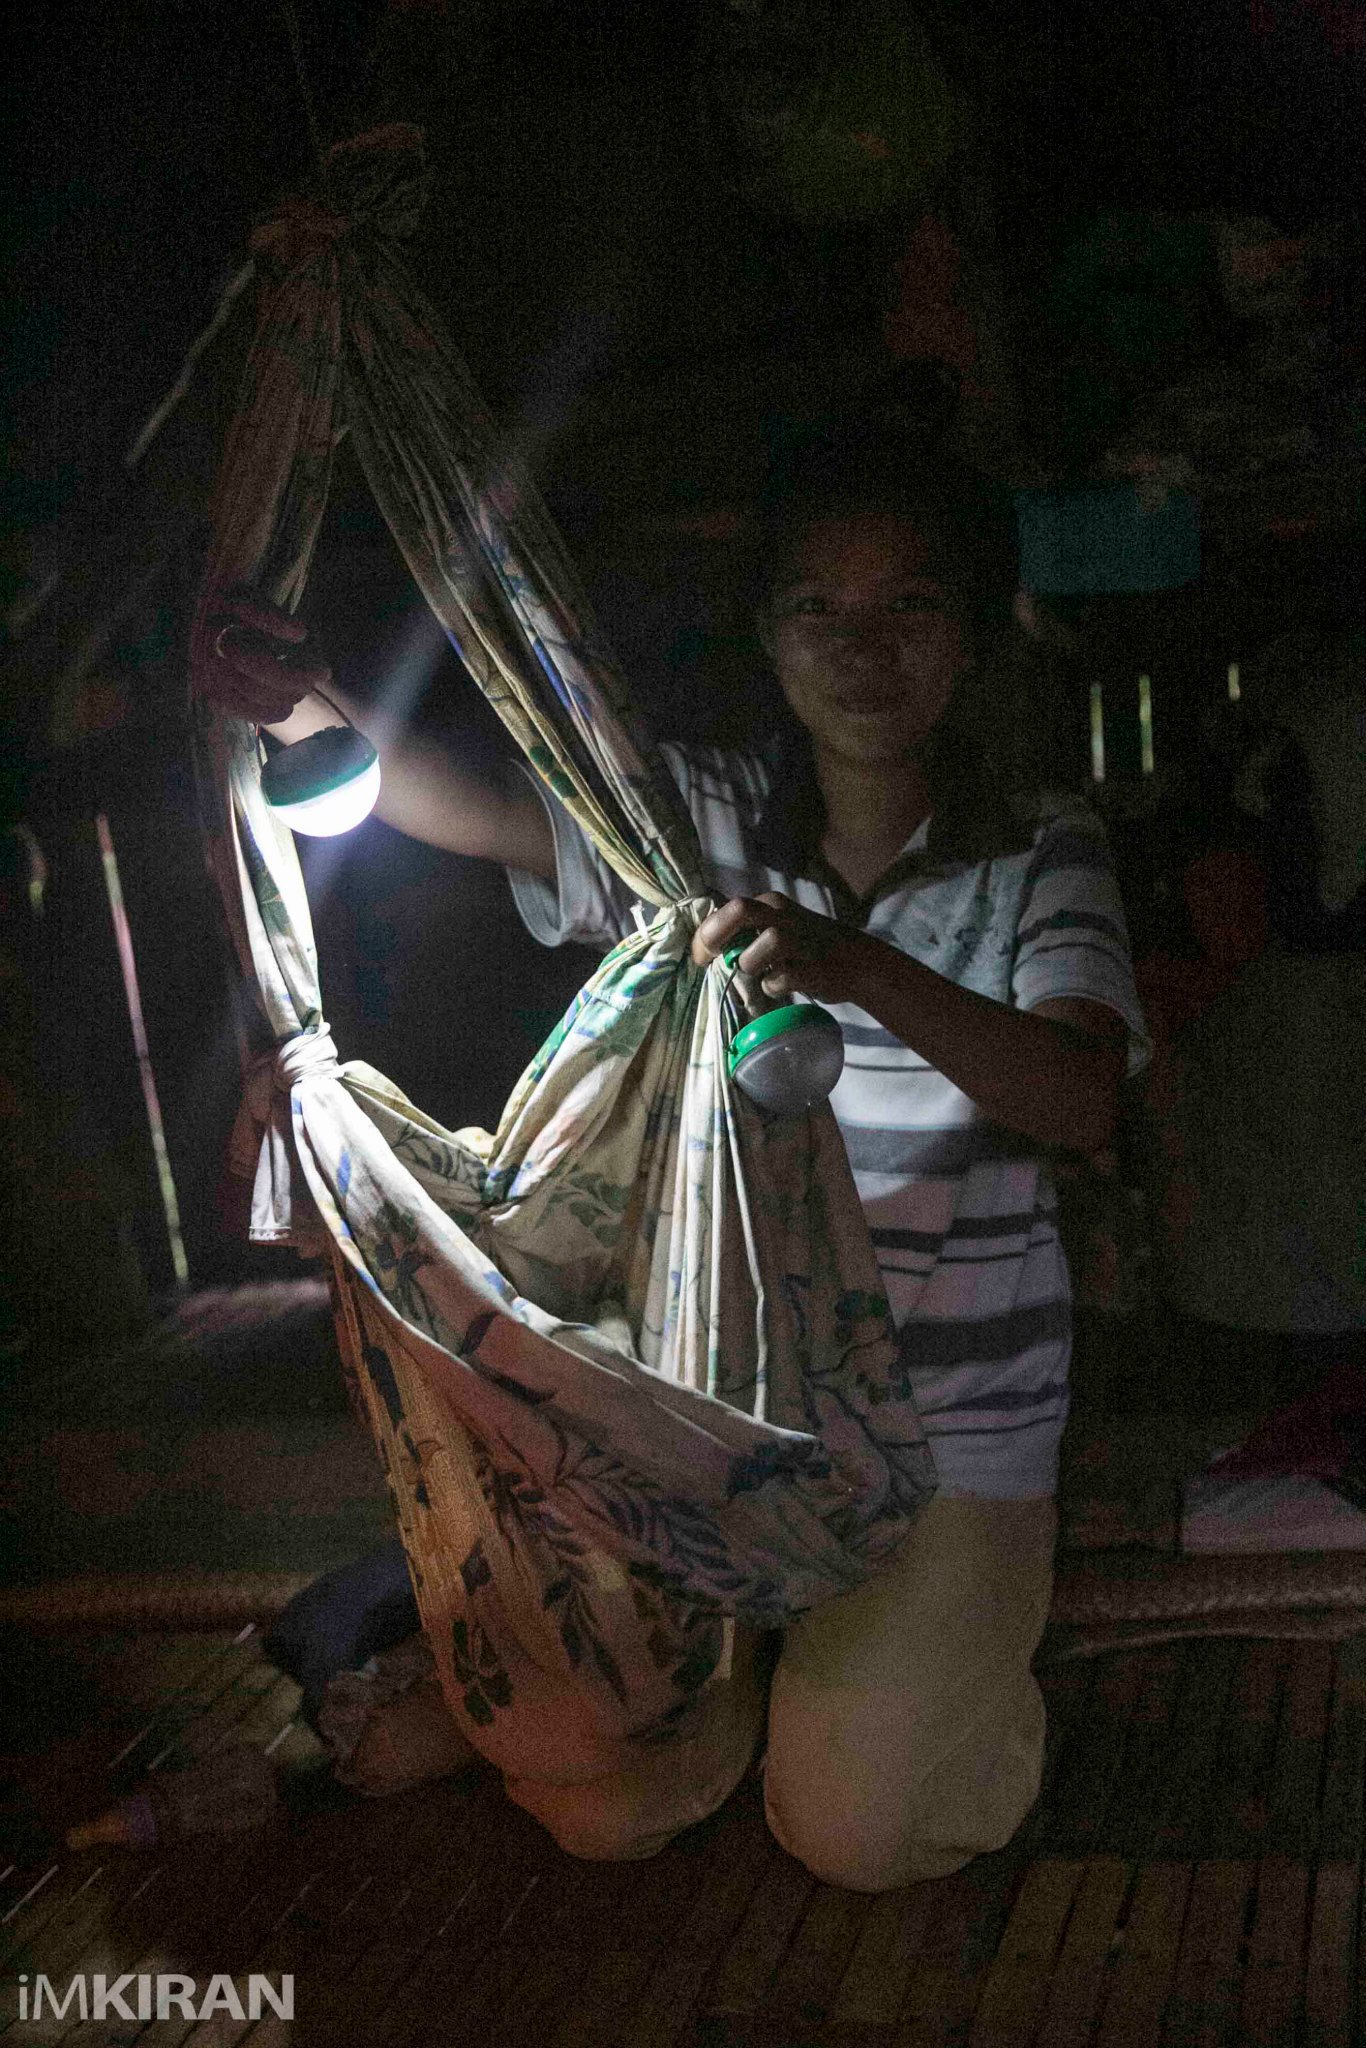 Nokero helps families worldwide. This young mother in the Philippines will never have to expose her newborn baby to kerosene thanks to Nokero solar lights. Photo Credit: iMKIRAN